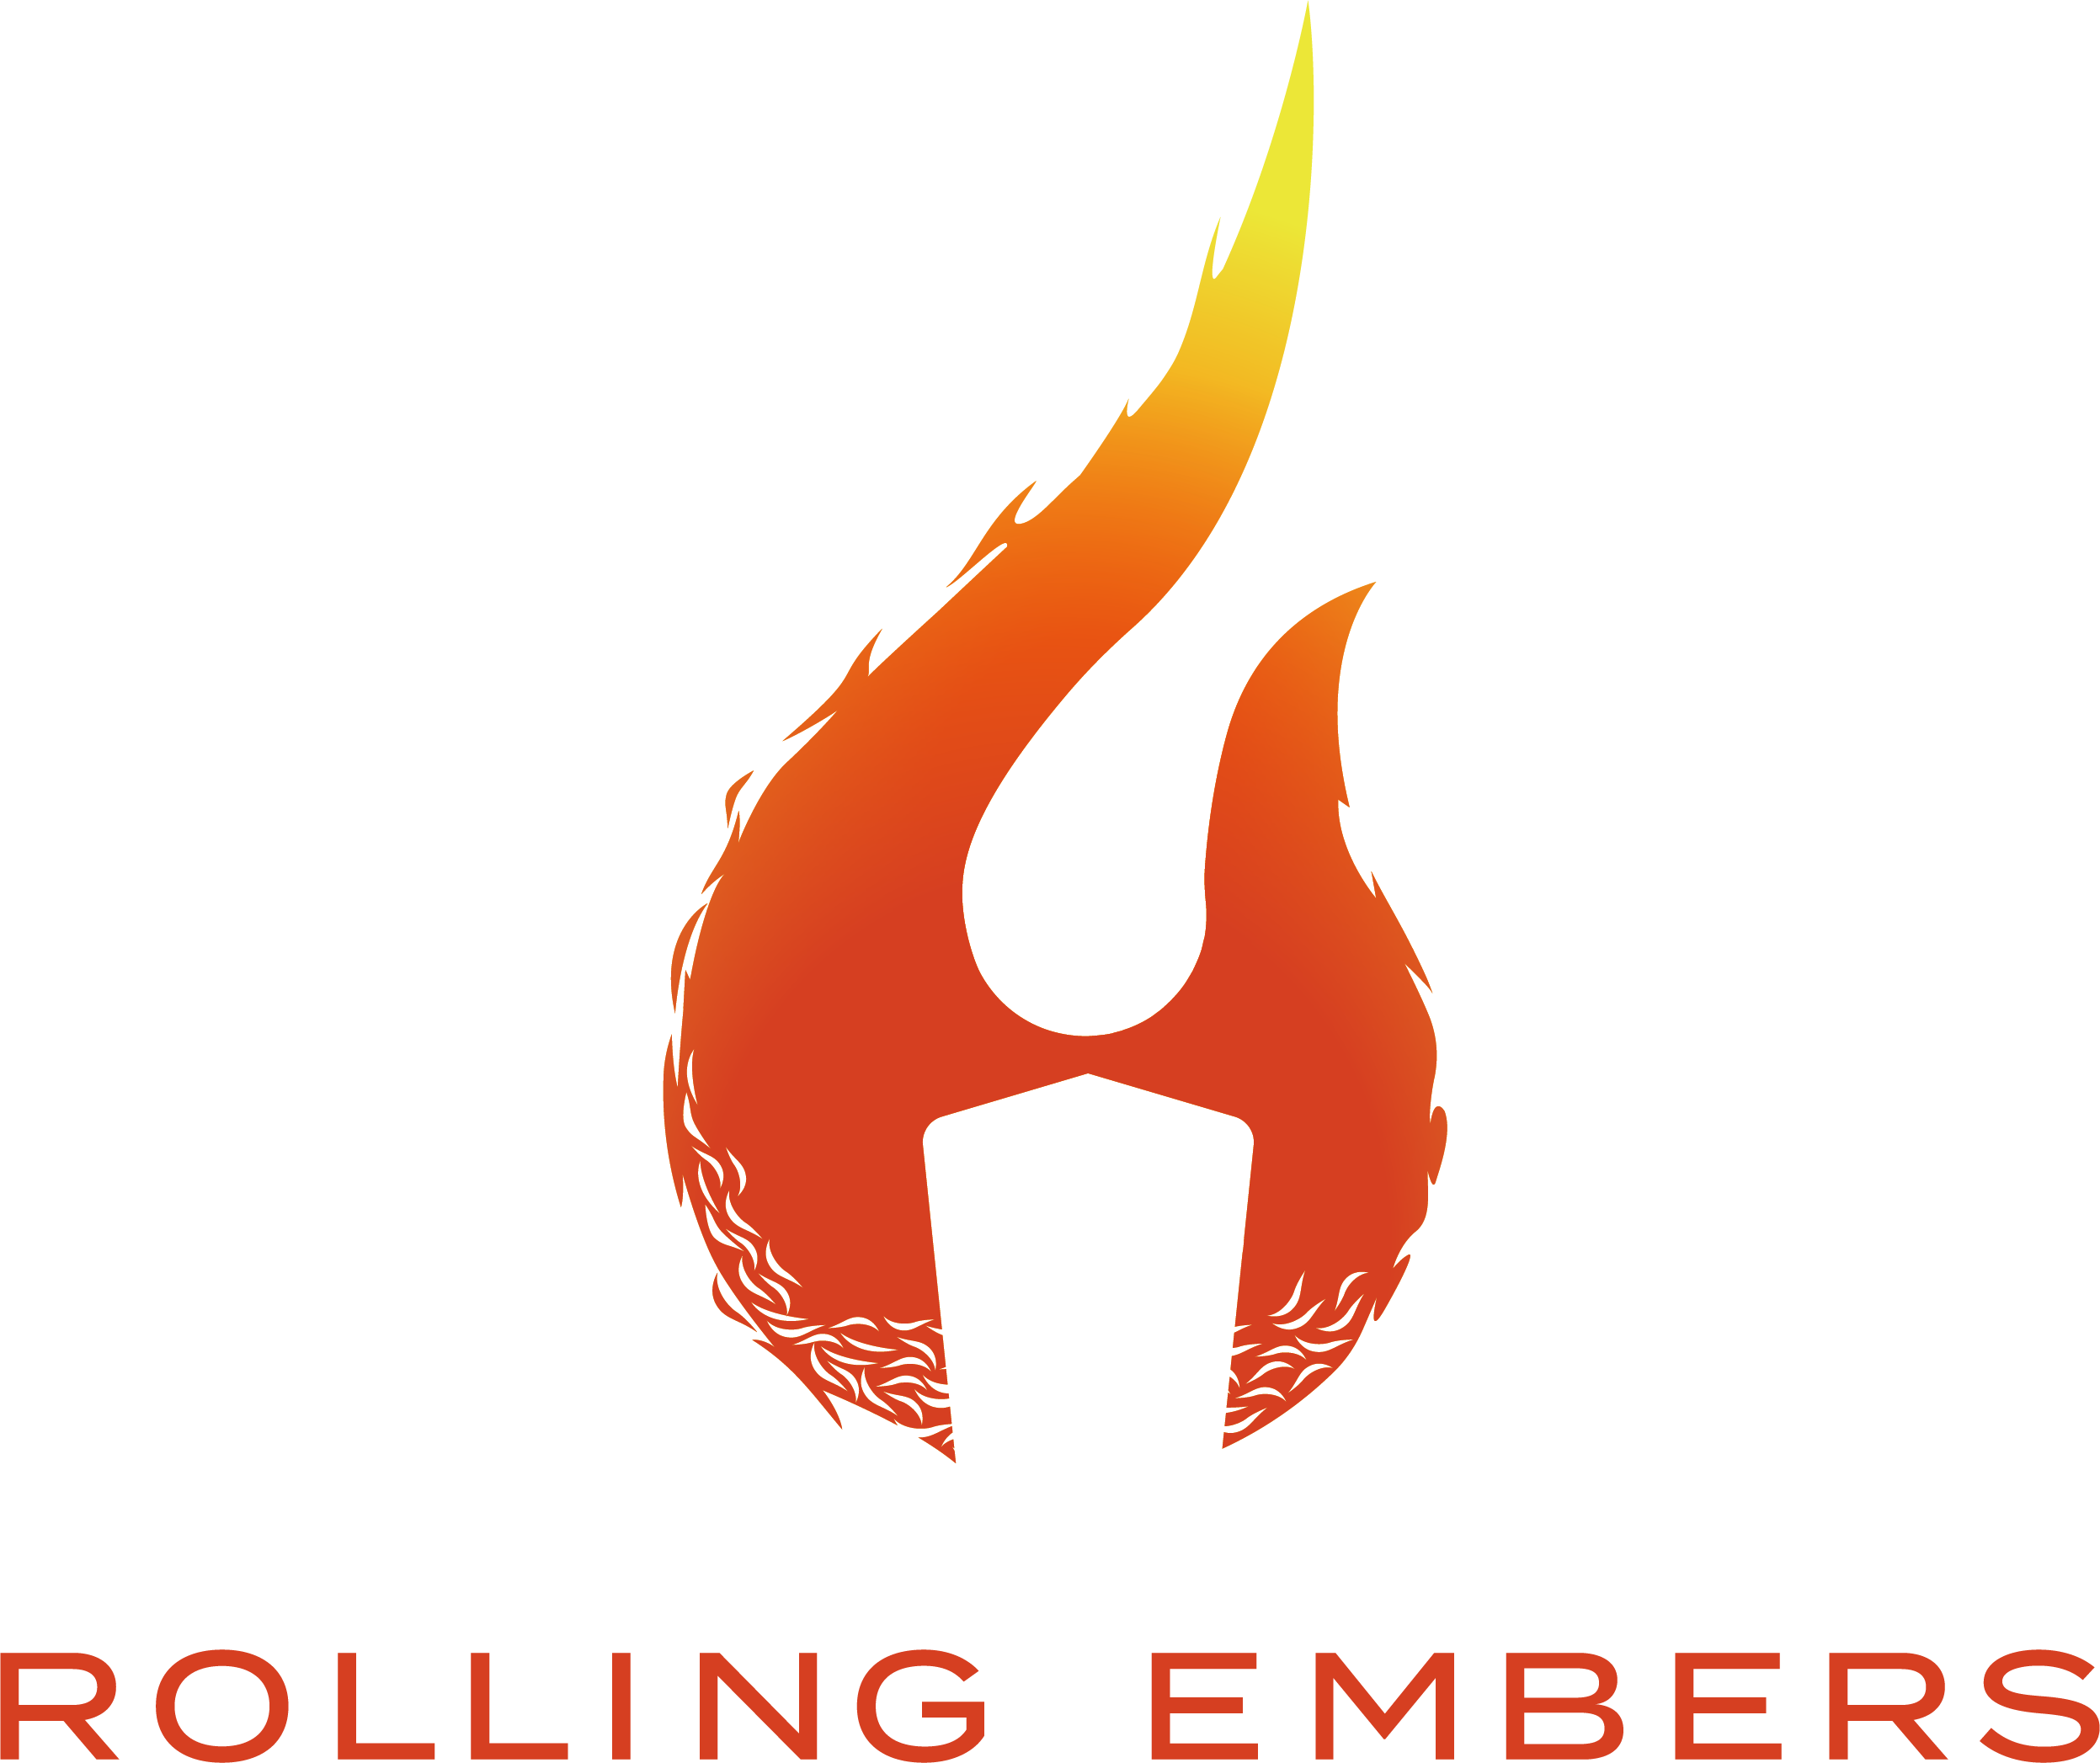 Rolling Embers